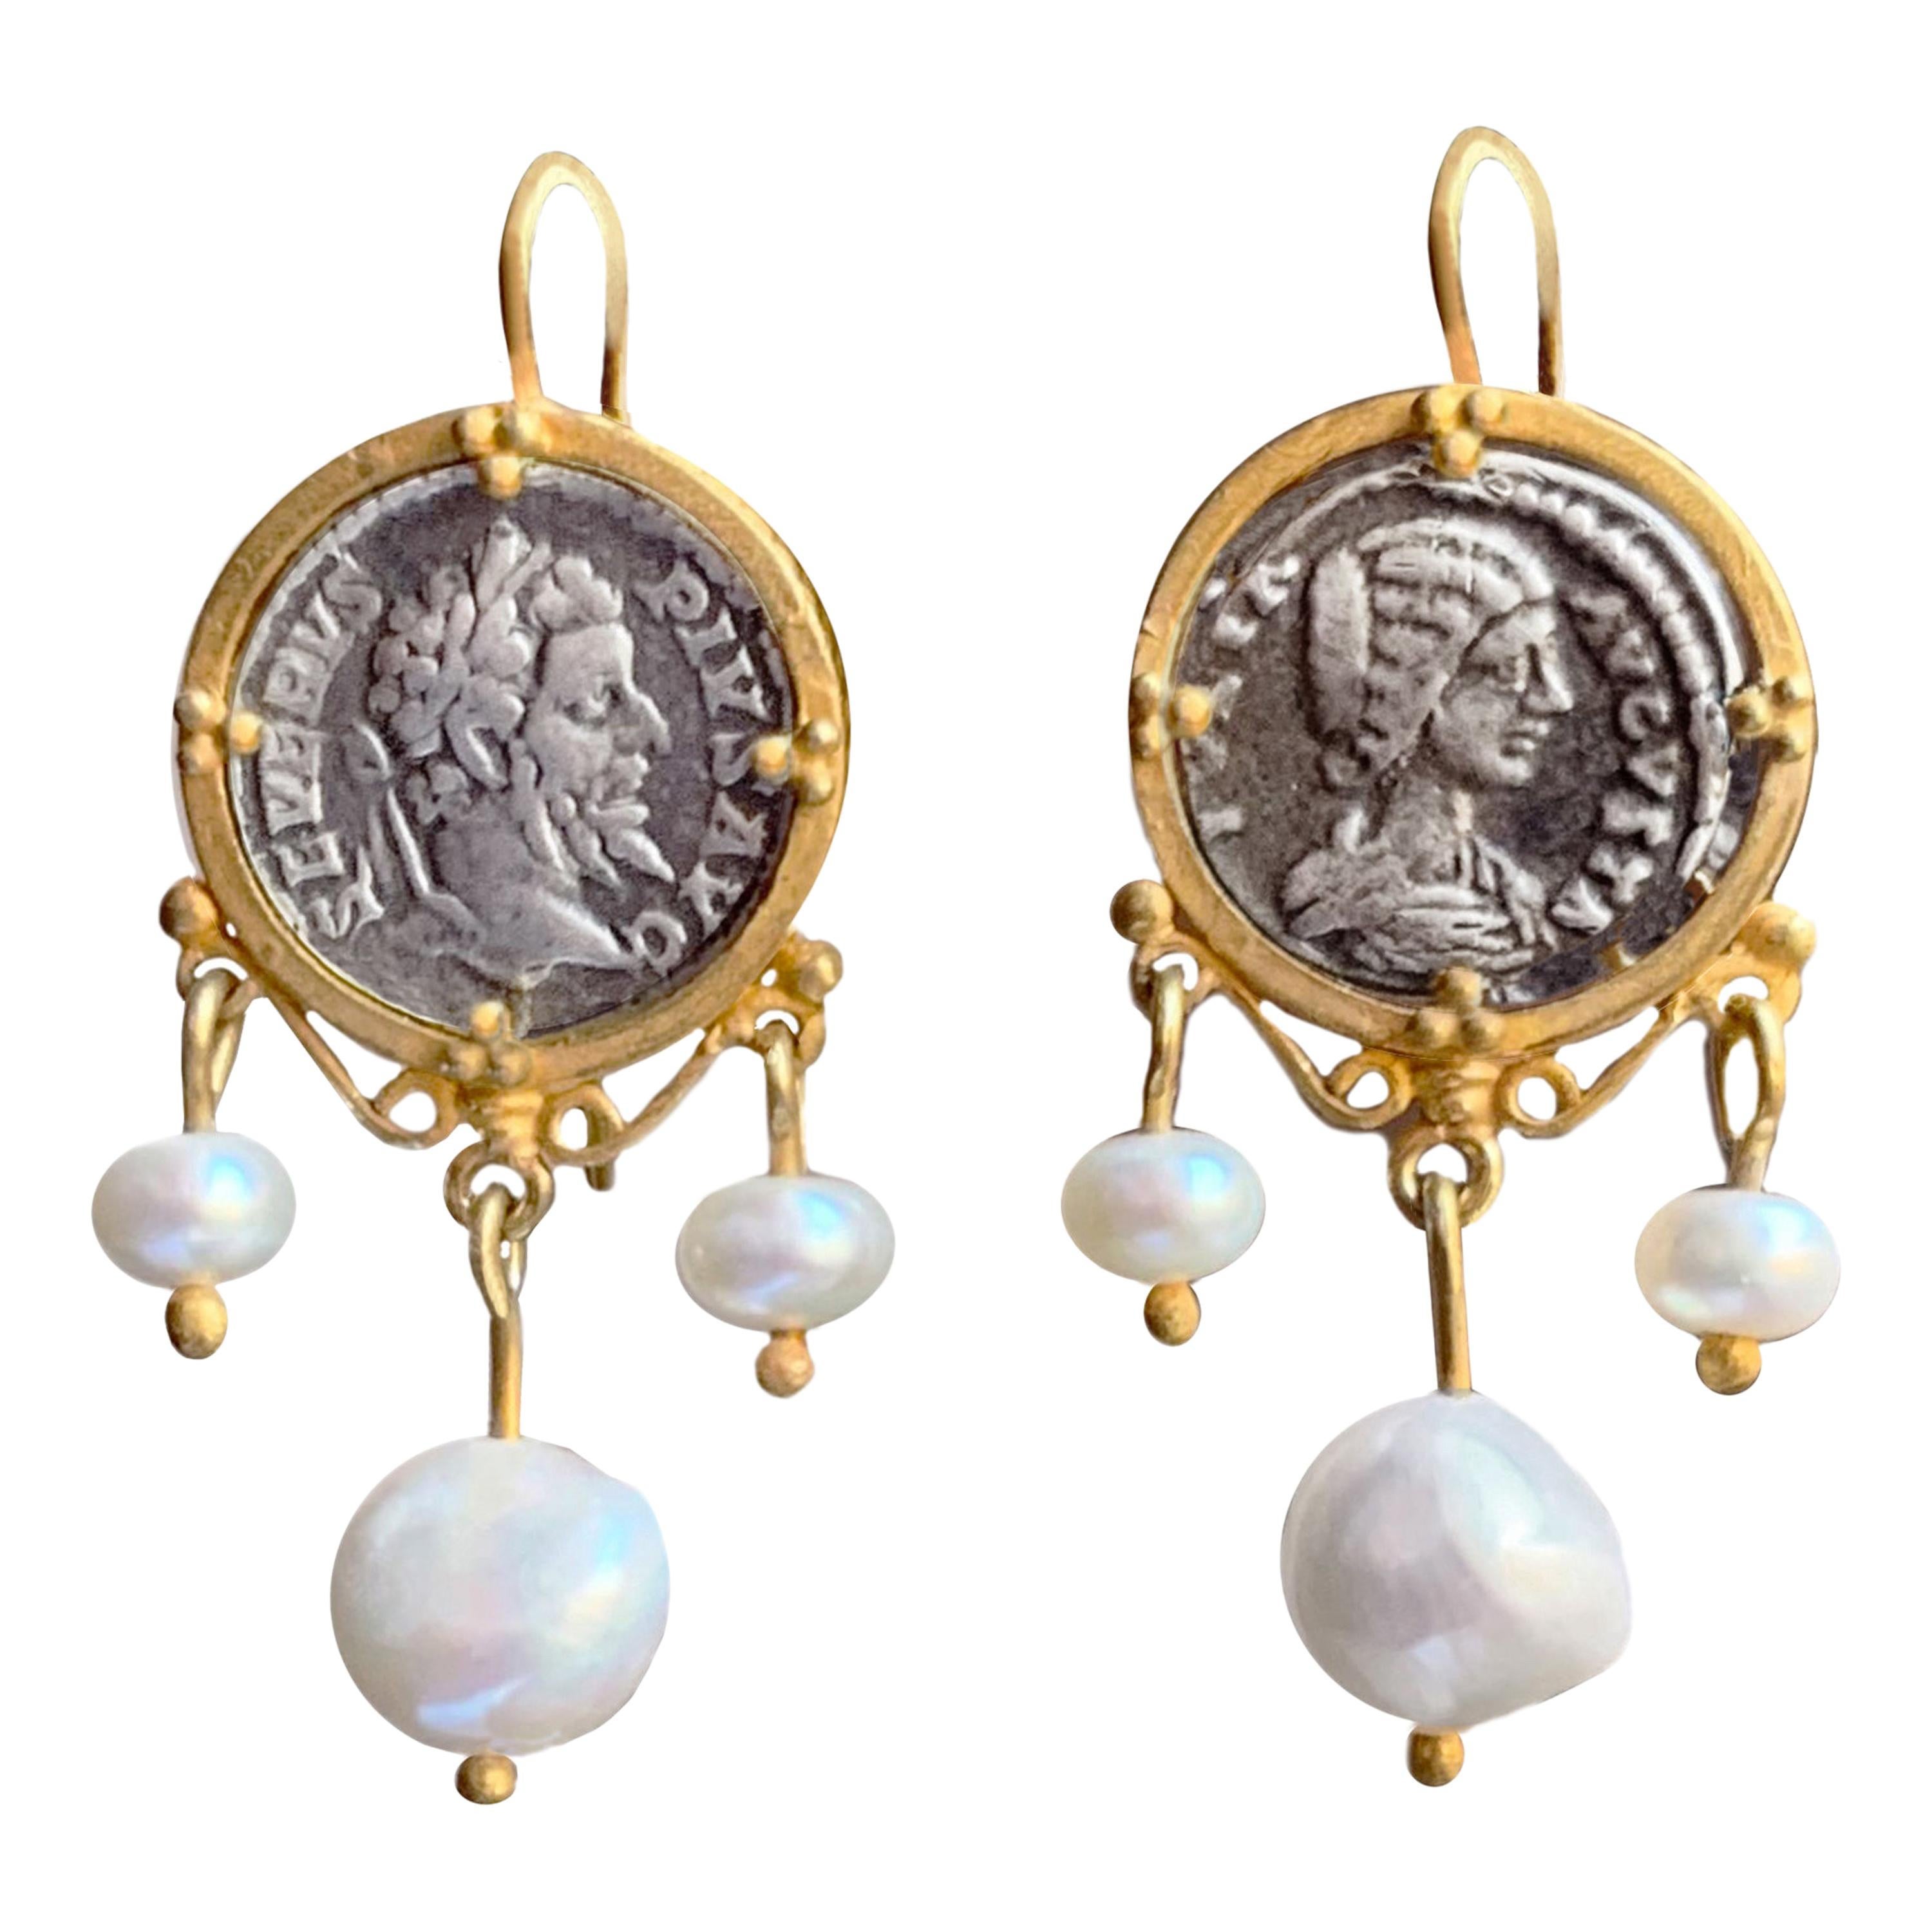 S.Severus and Julia Domna Roman Coin 24 Kt Gold Gilded Sterling Silver Earrings